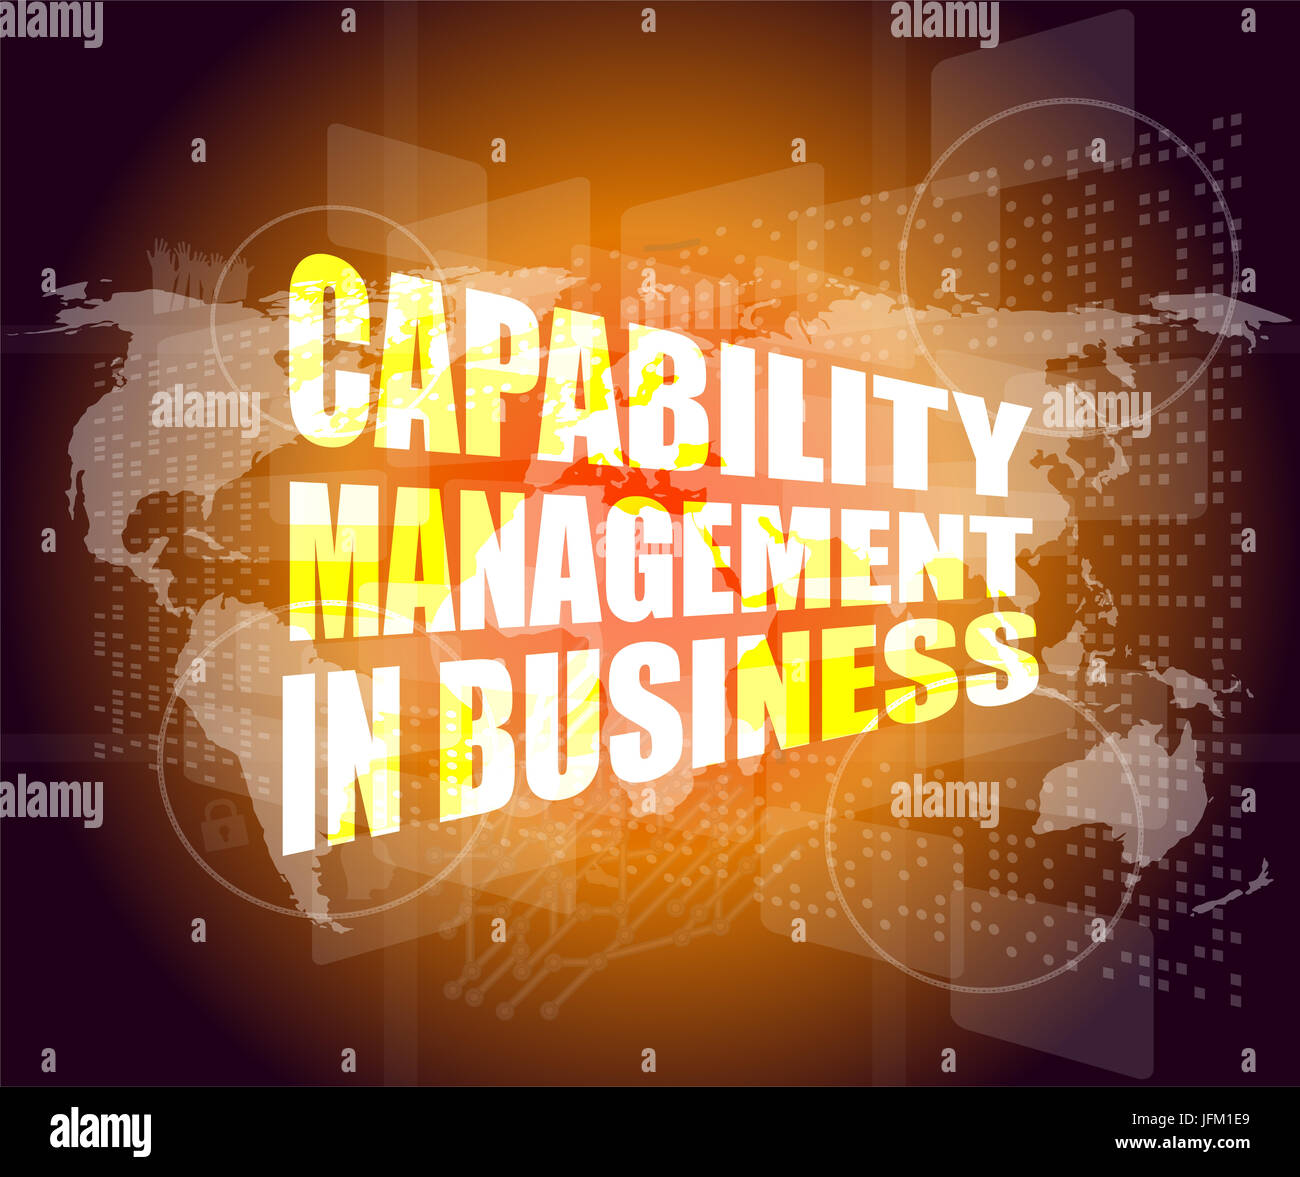 capability management in business words on touch screen interface Stock Photo